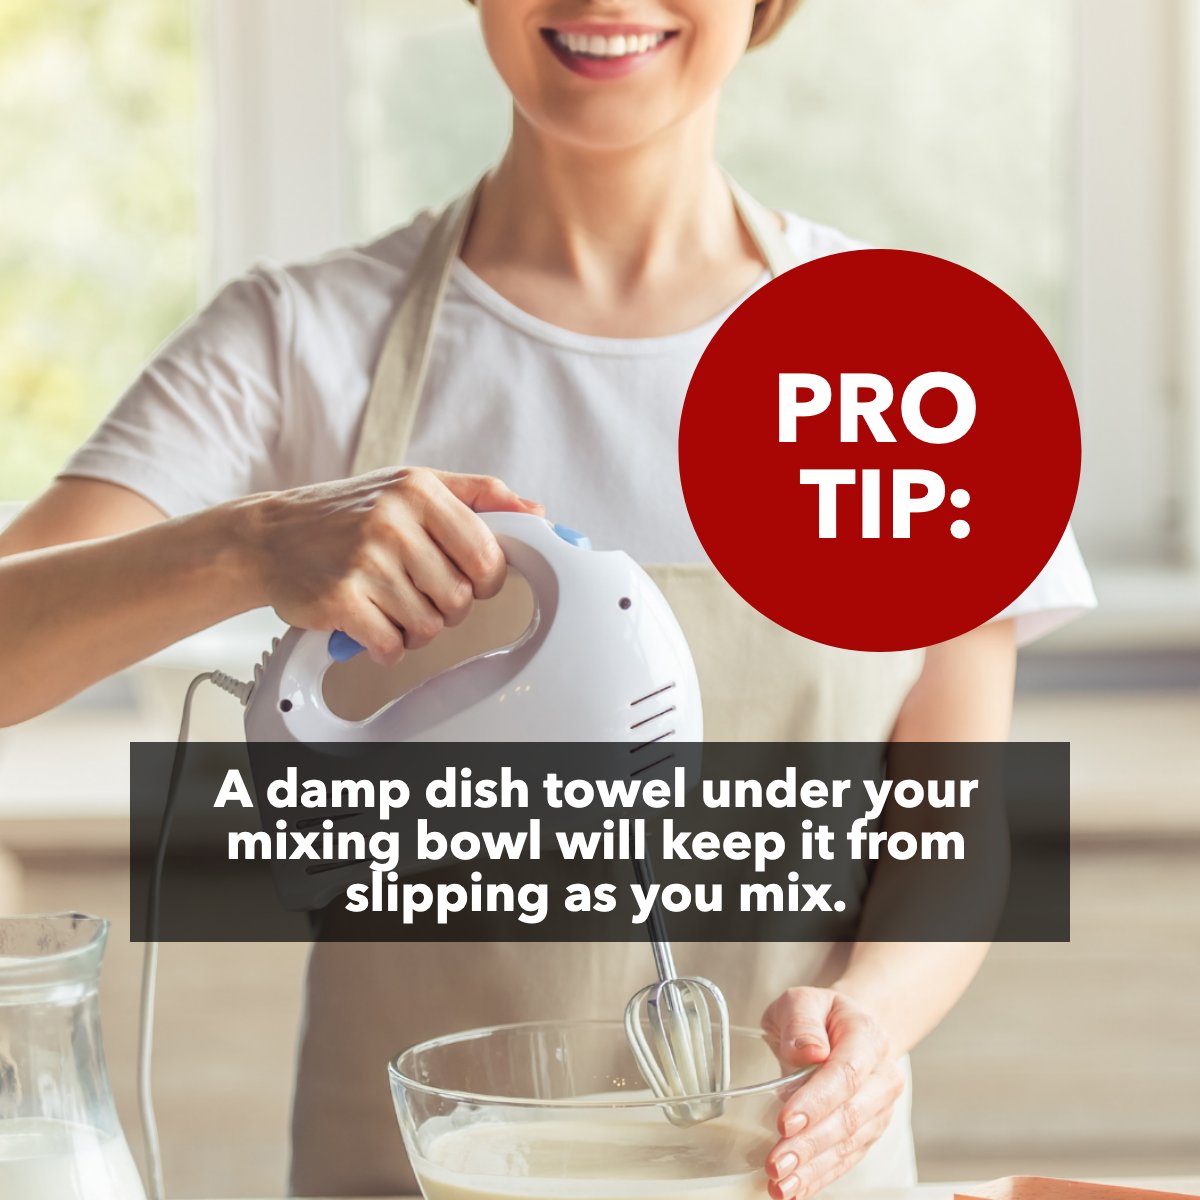 Are you the family baker? We love this hack:

Place a damp dishtowel under your mixing bowl 🥣 to keep it from slipping as you mix.

Do you have a favorite kitchen hack? Drop it below!

#baking #mixingbowl #kitchenhack #lifehack #bakingtip